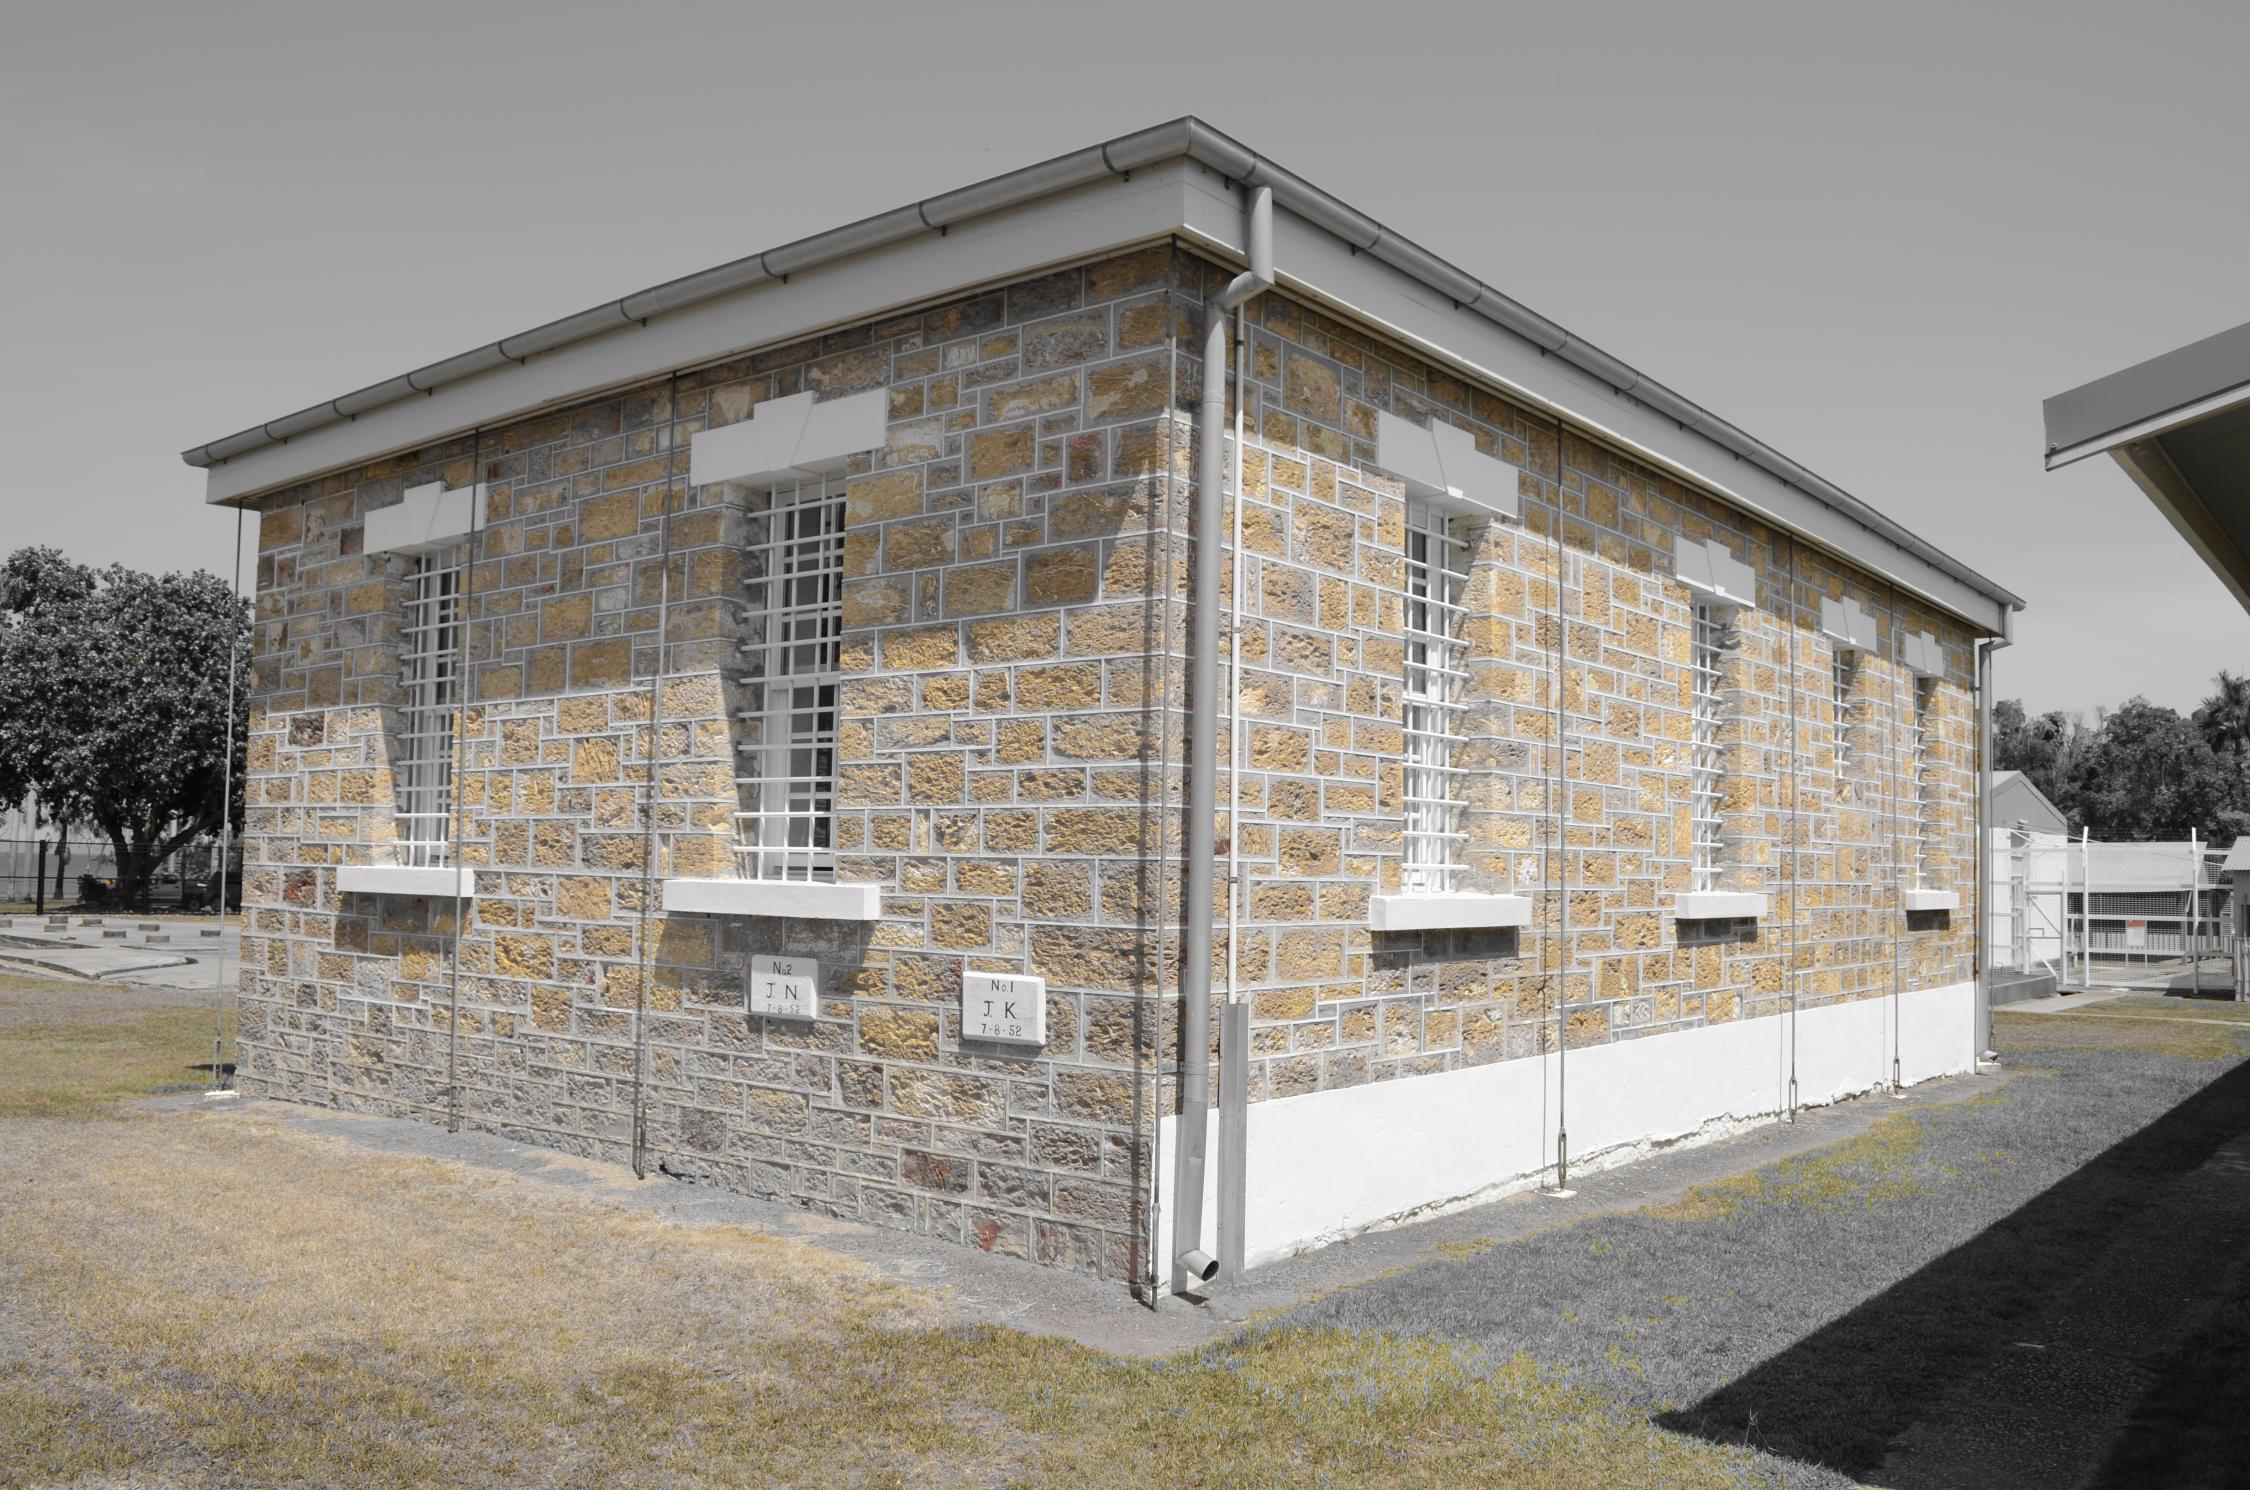 Picture of Fannie Bay Gaol building - square building with orange stone blocks. Background colour edited to grey in order to make the building stand out more. 